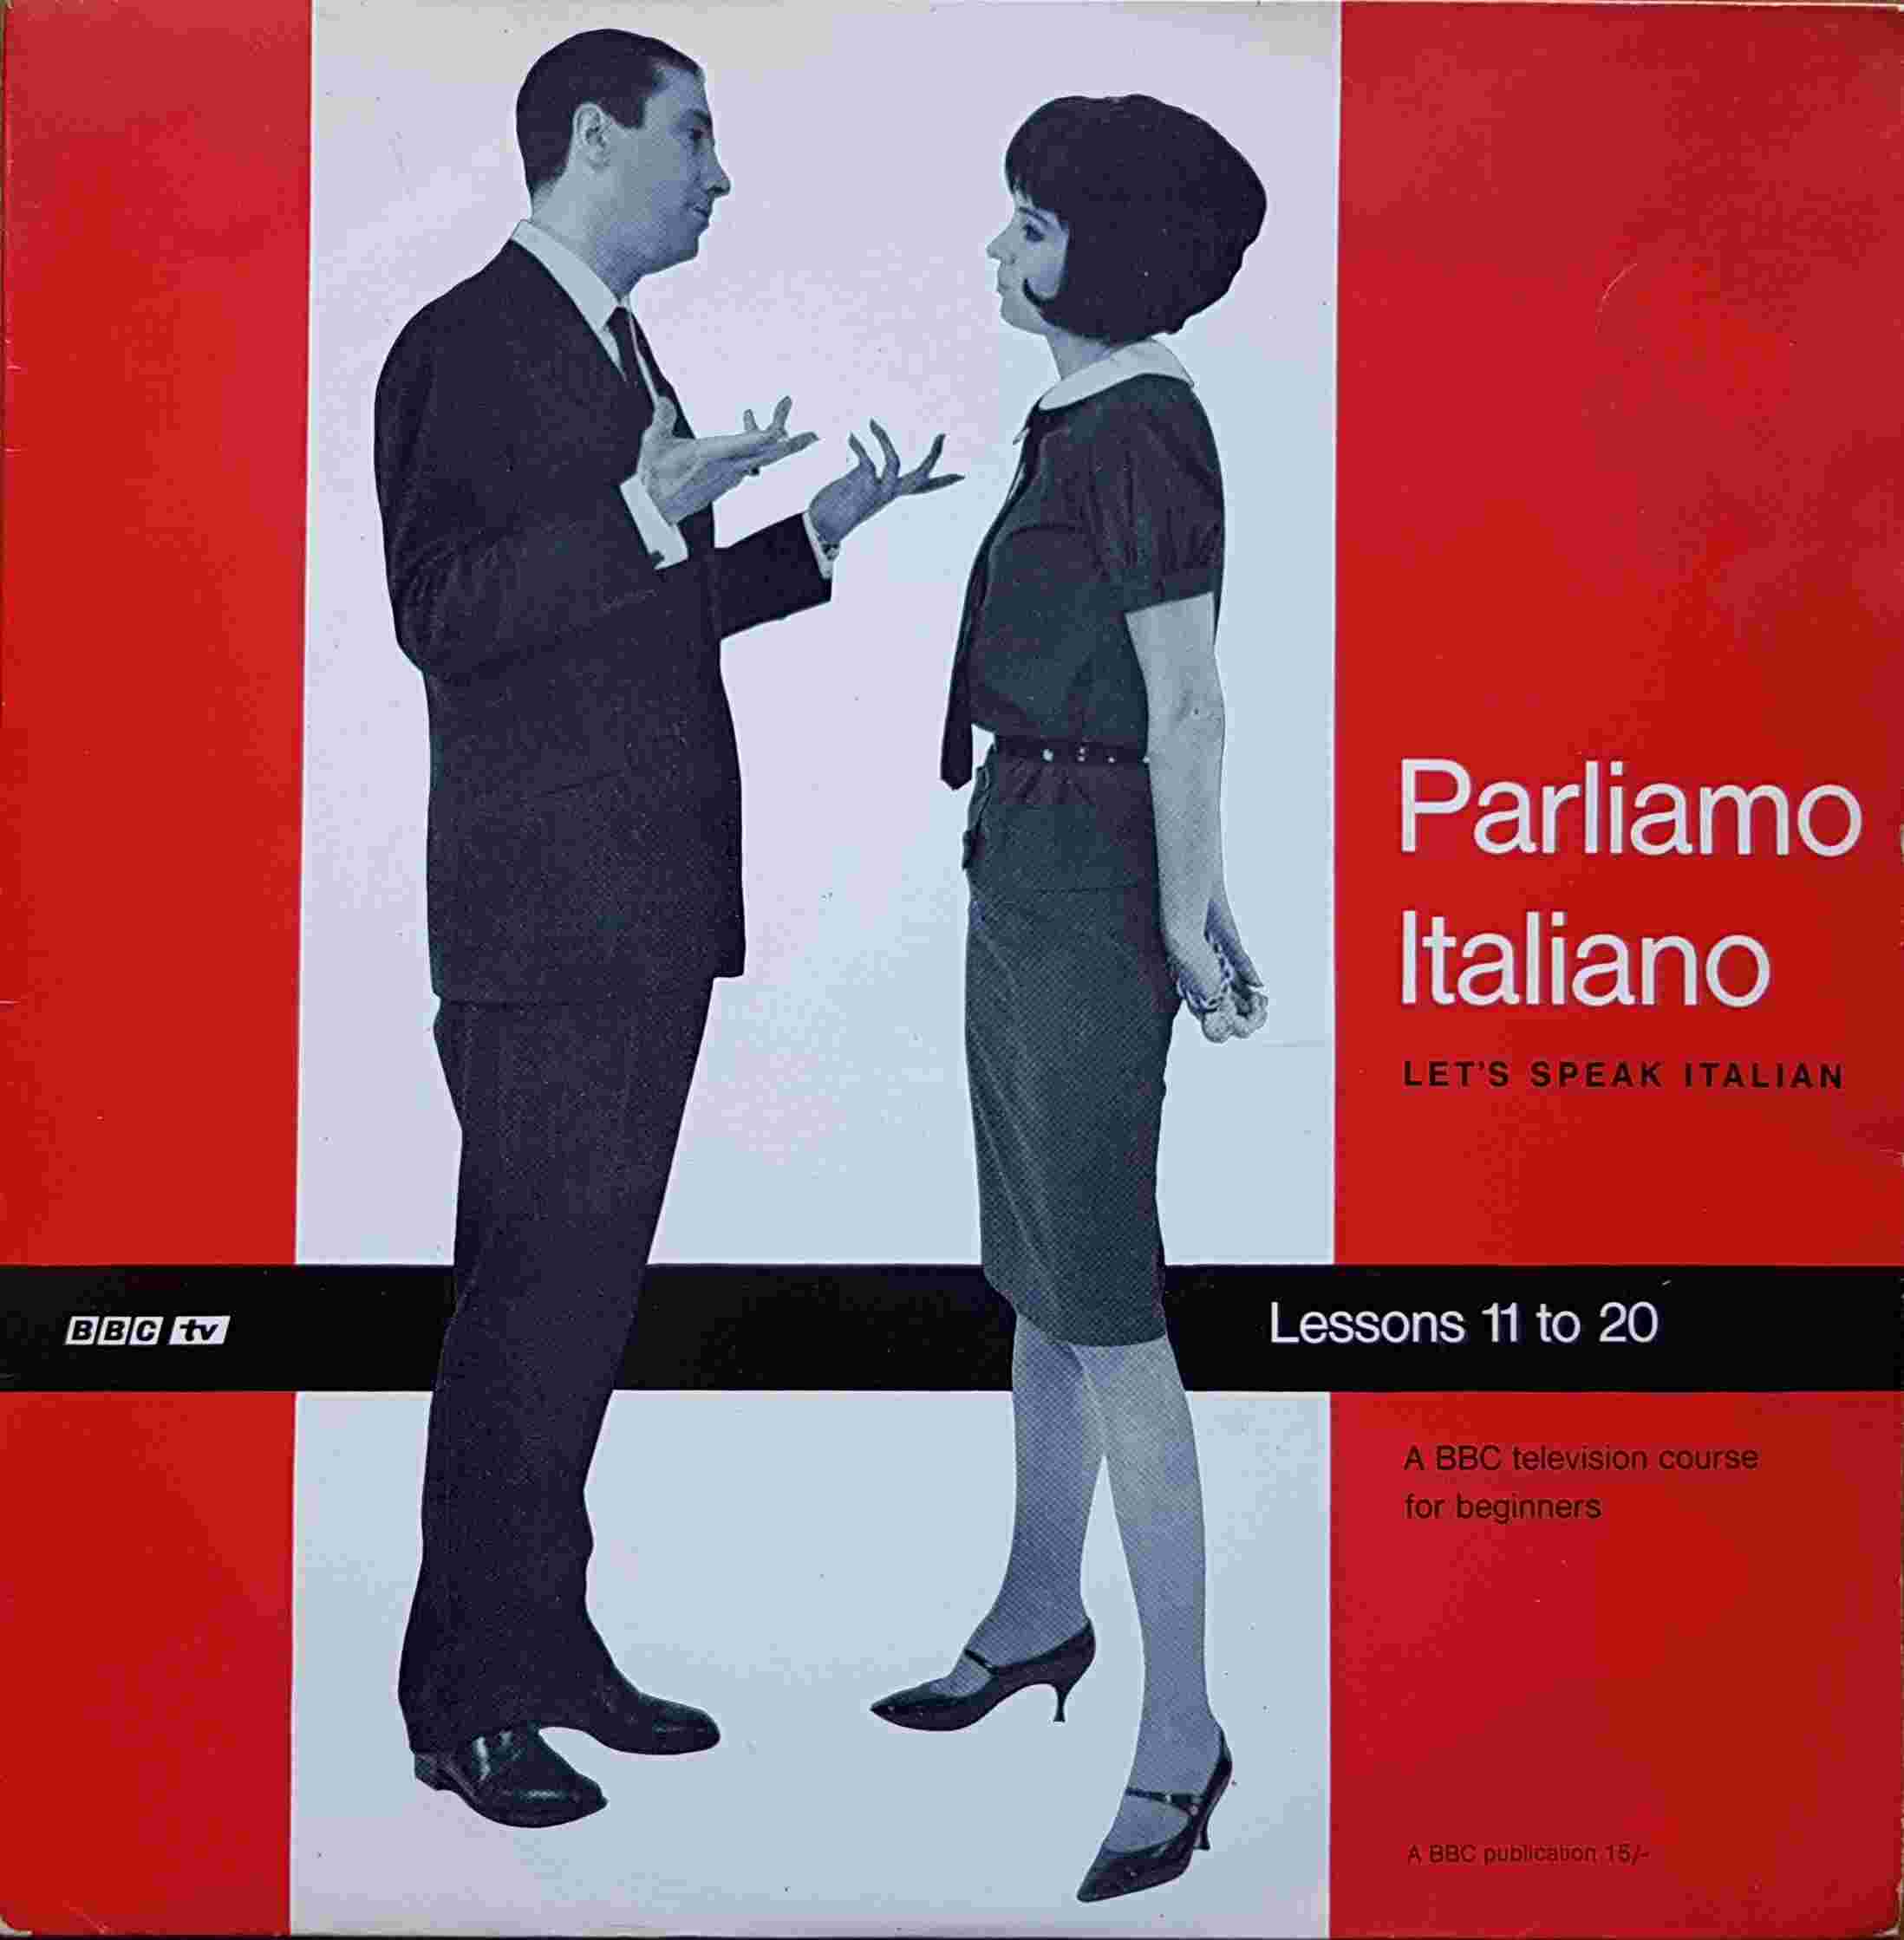 Picture of OP 3/4 Parliamo Italiano - Let's Speak Italian lessons 11 - 20 by artist Toni Cerutti from the BBC albums - Records and Tapes library